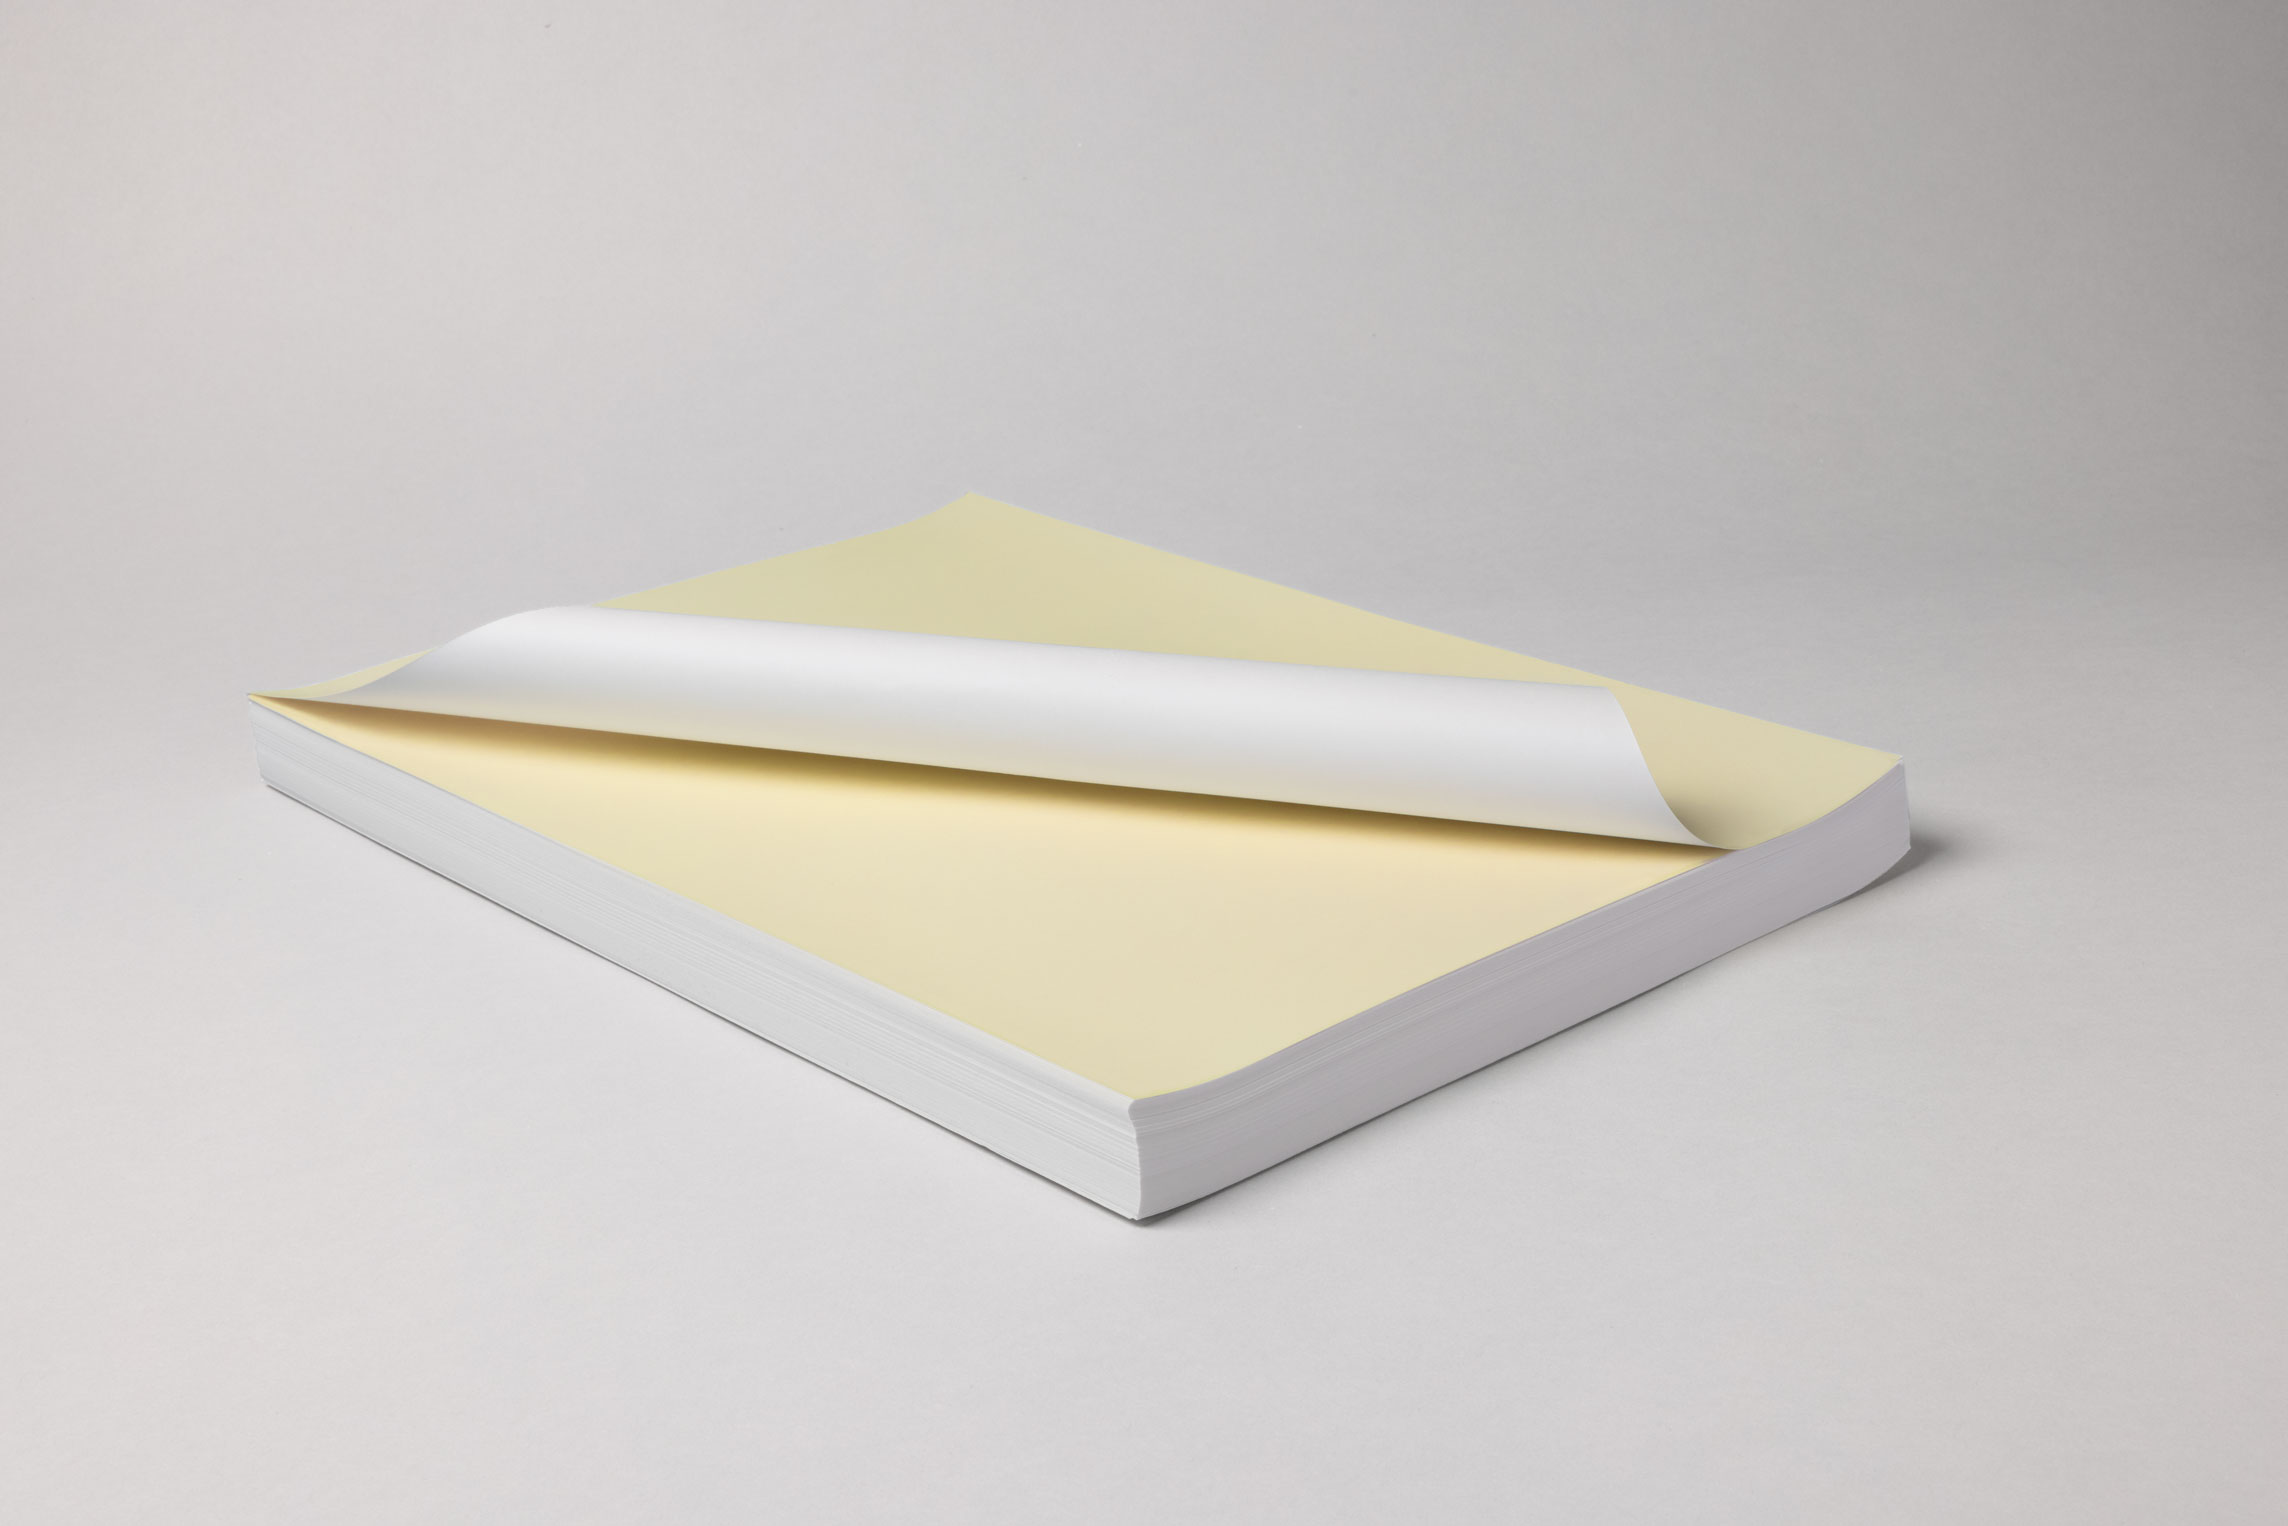 Ceramictoner laminated paper with standard flux is suitable for application on porcelain and ceramics. The coating is applied to the decal with the help of a laminator.